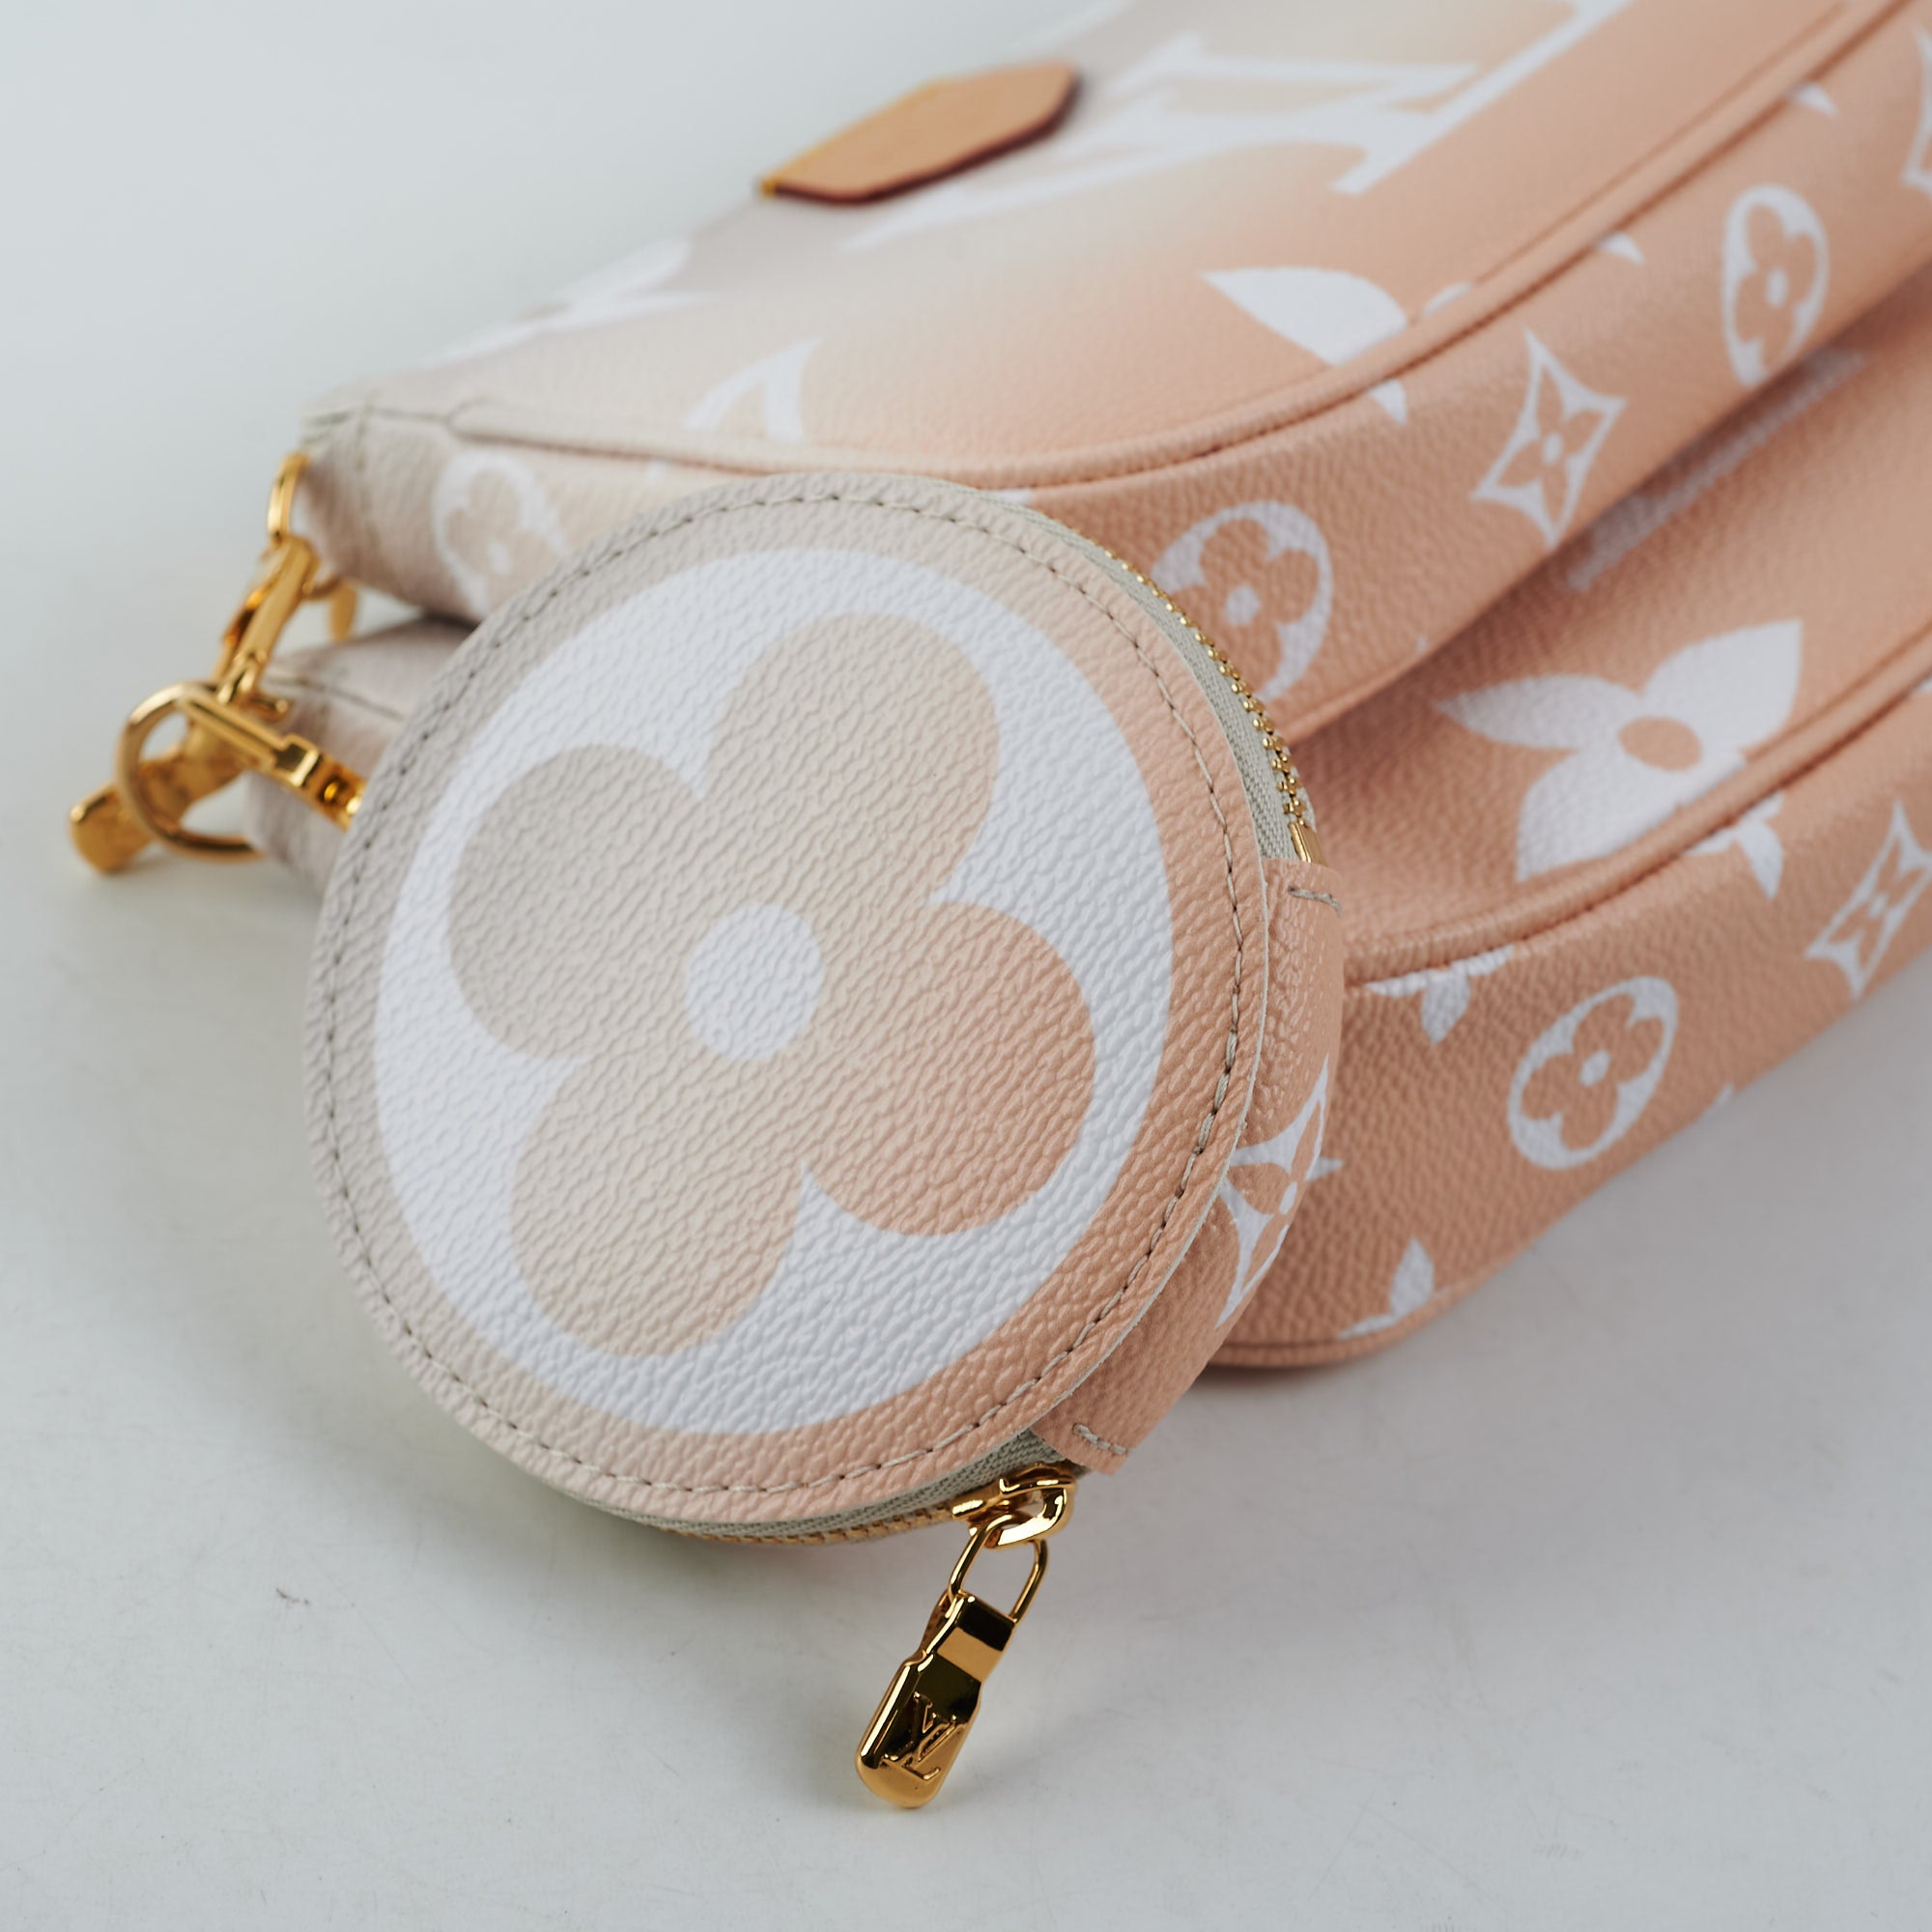 Louis Vuitton MultiPochette By the Pool Ombre Peach, New in Box WA001